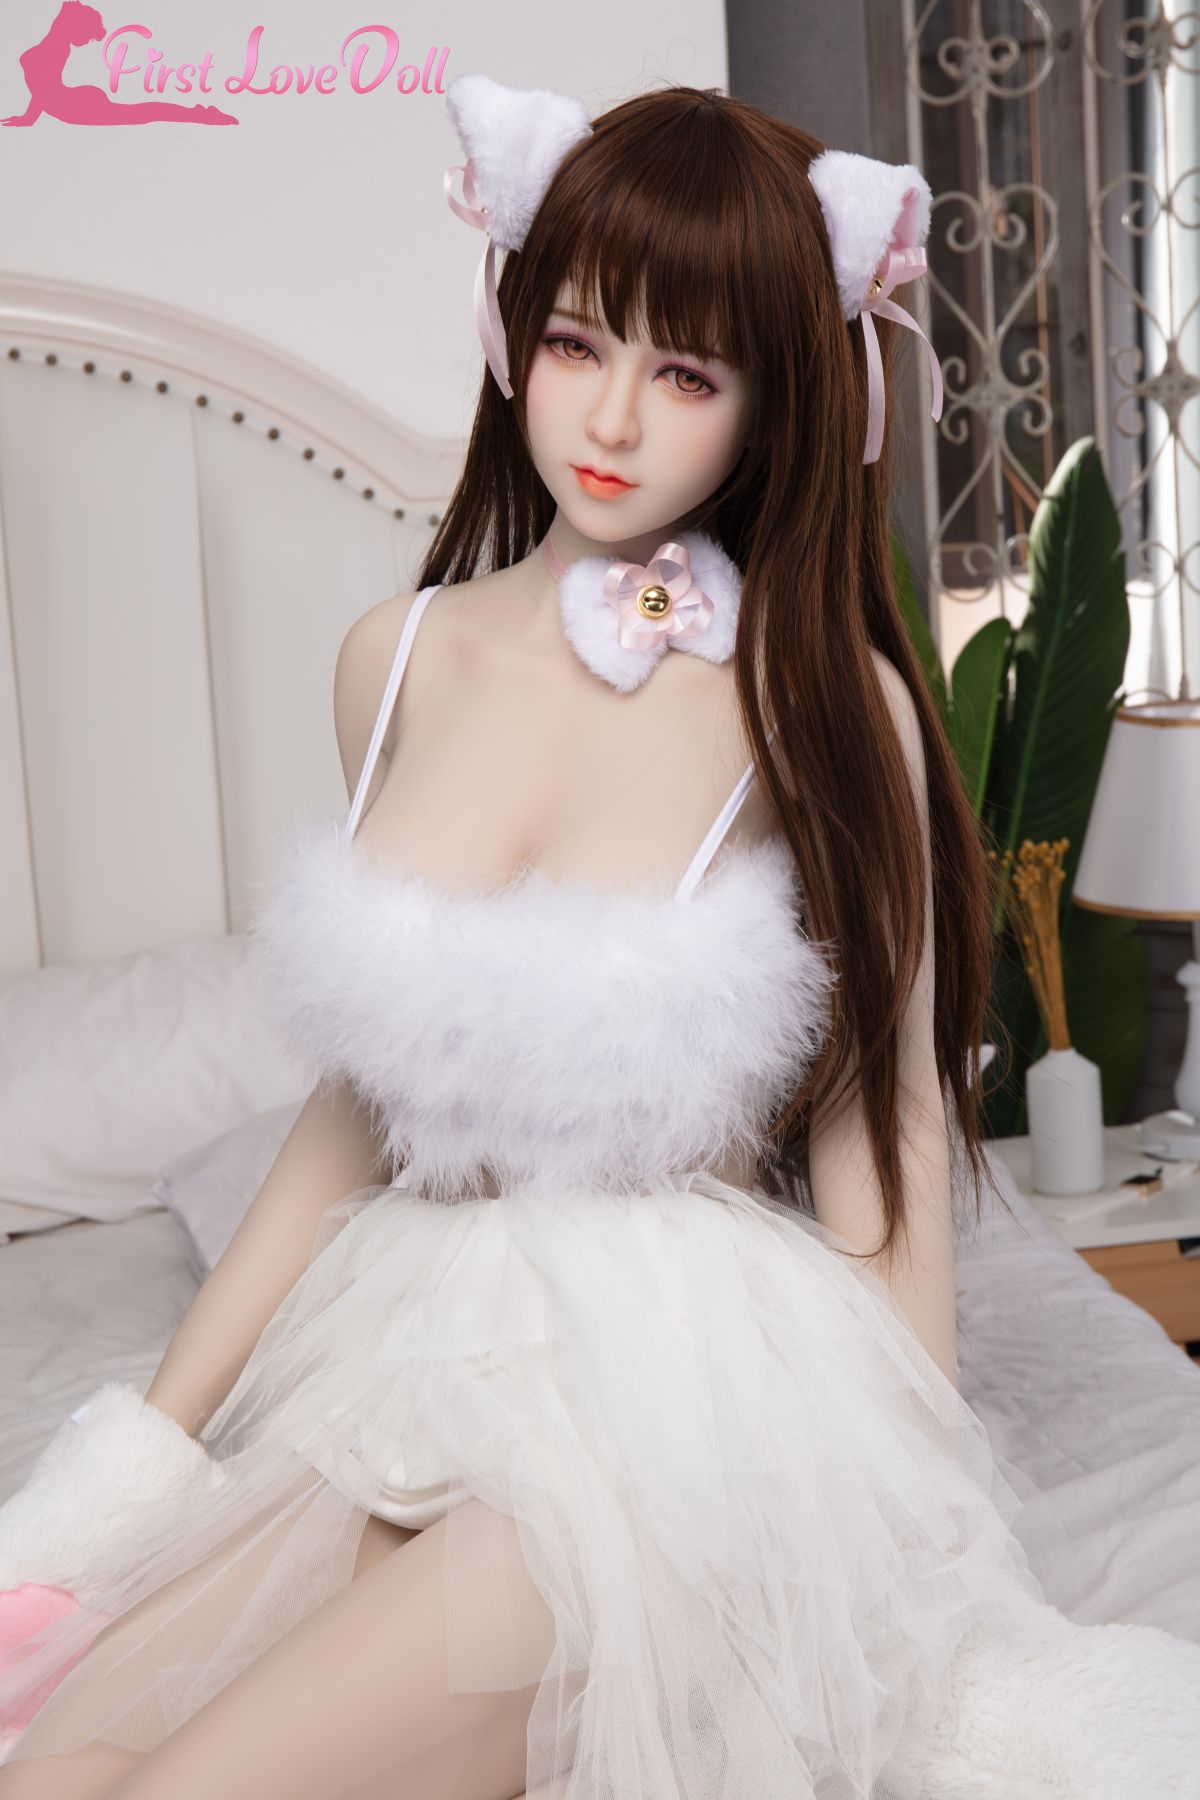 JX Doll | Emi- 5ft 7/170cm Japanese Style Pretty Realistic Full TPE Sex Doll-First Love Doll